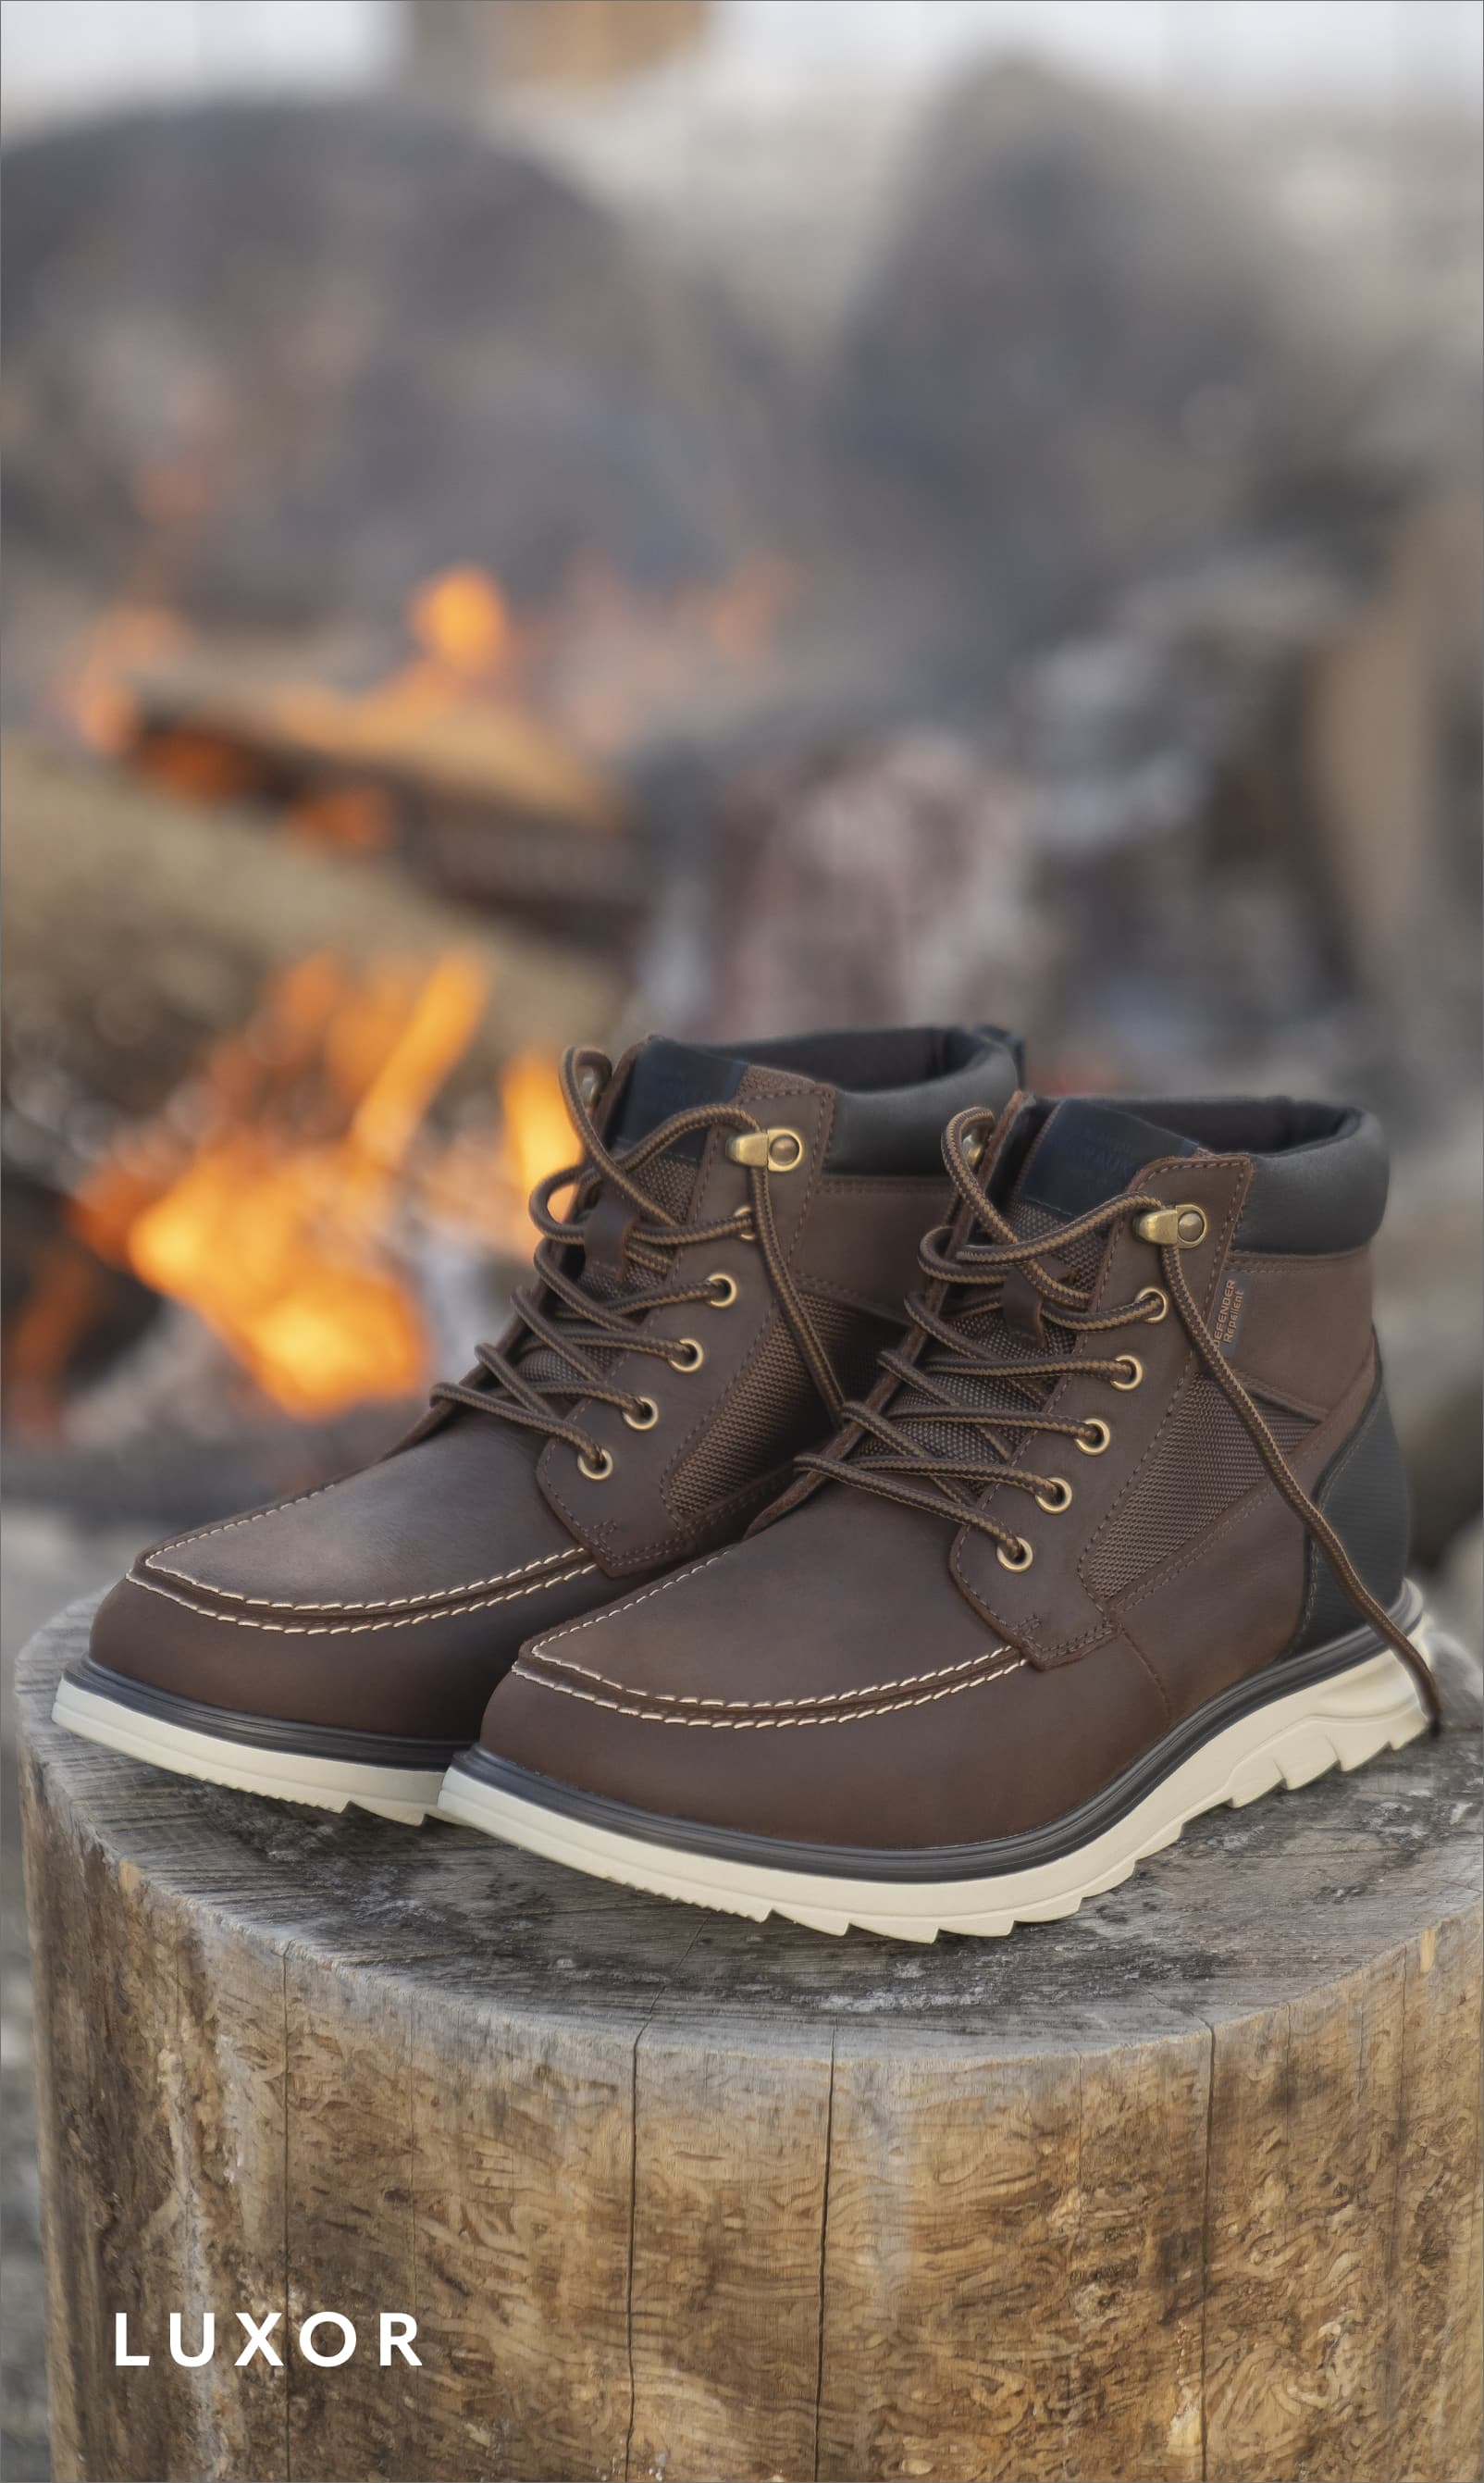 Men's Boots category. Image features the Luxor Moc Toe Boot in brown.